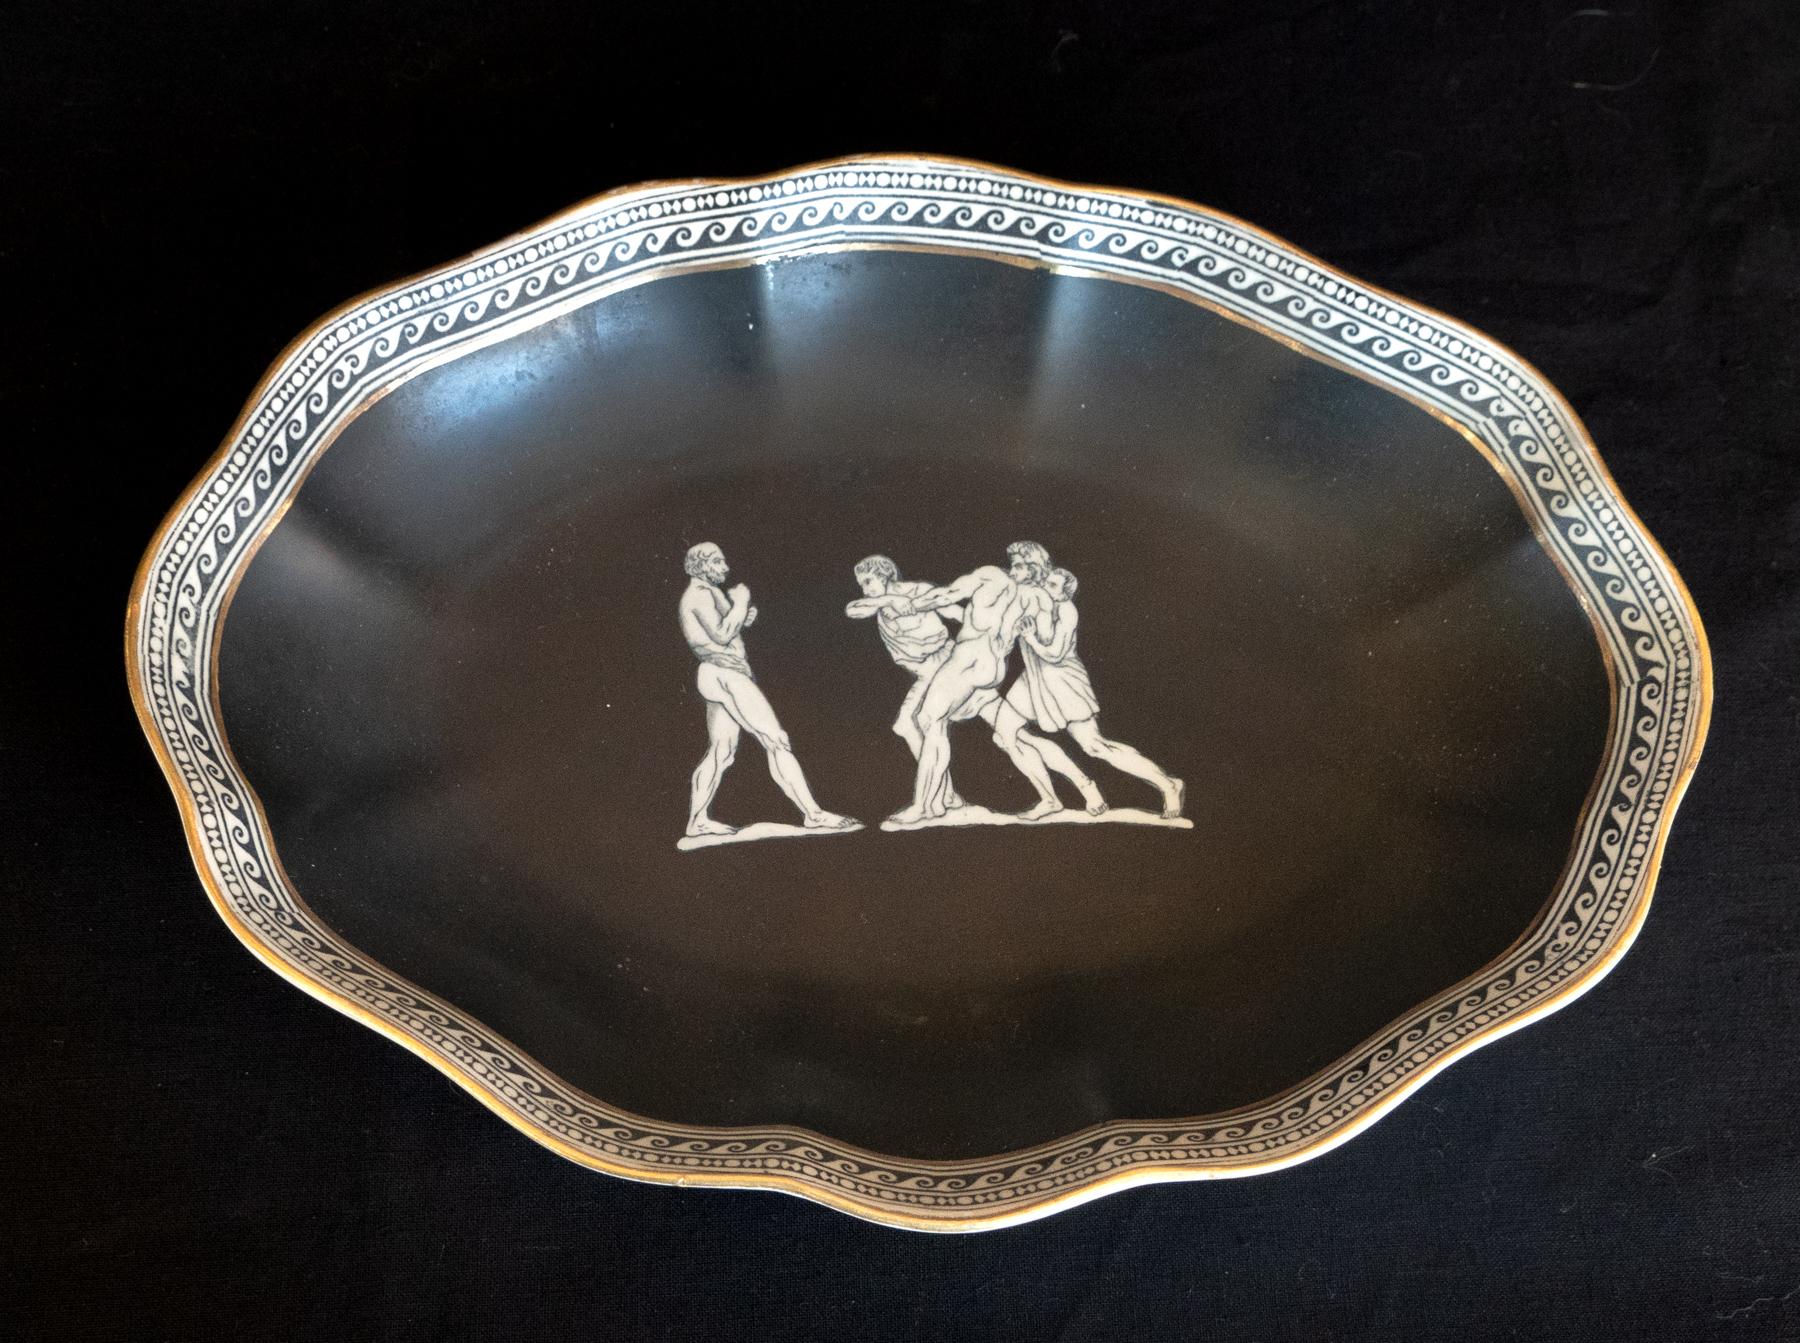 Early 20th century english foilate oval form platter w/ Classic Greco Roman Wrestlers.Gold gilt on the rim with an intricate transferrer border. Black ground with white figure drawn in a combative pose. Decorative. minor losses to the gold gilt